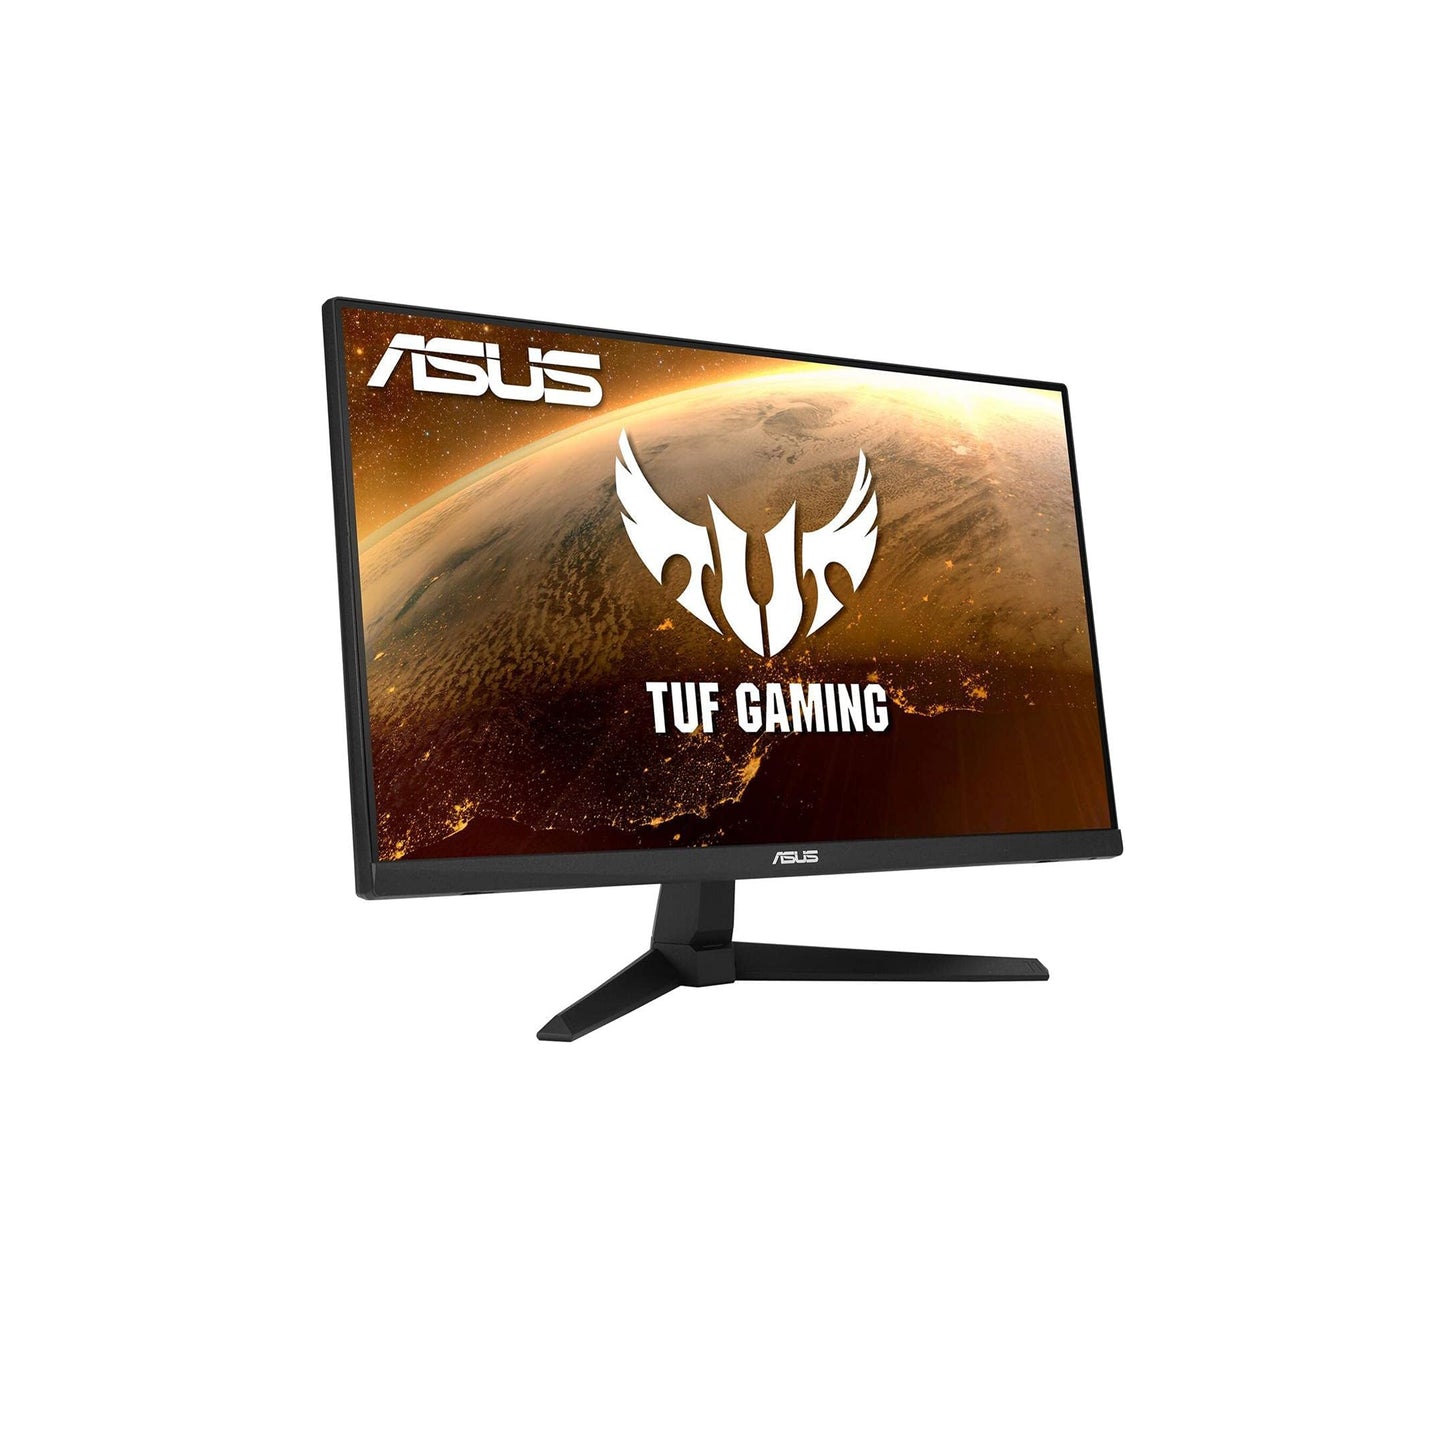 ASUS TUF Gaming VG27AQL1A 27” HDR Monitor, 1440P WQHD (2560 x 1440), 170Hz (Supports 144Hz), IPS, 1ms, G-SYNC Compatible, Extreme Low Motion Blur Sync, HDR400, 130% sRGB, Eye Care, HDMI DisplayPort